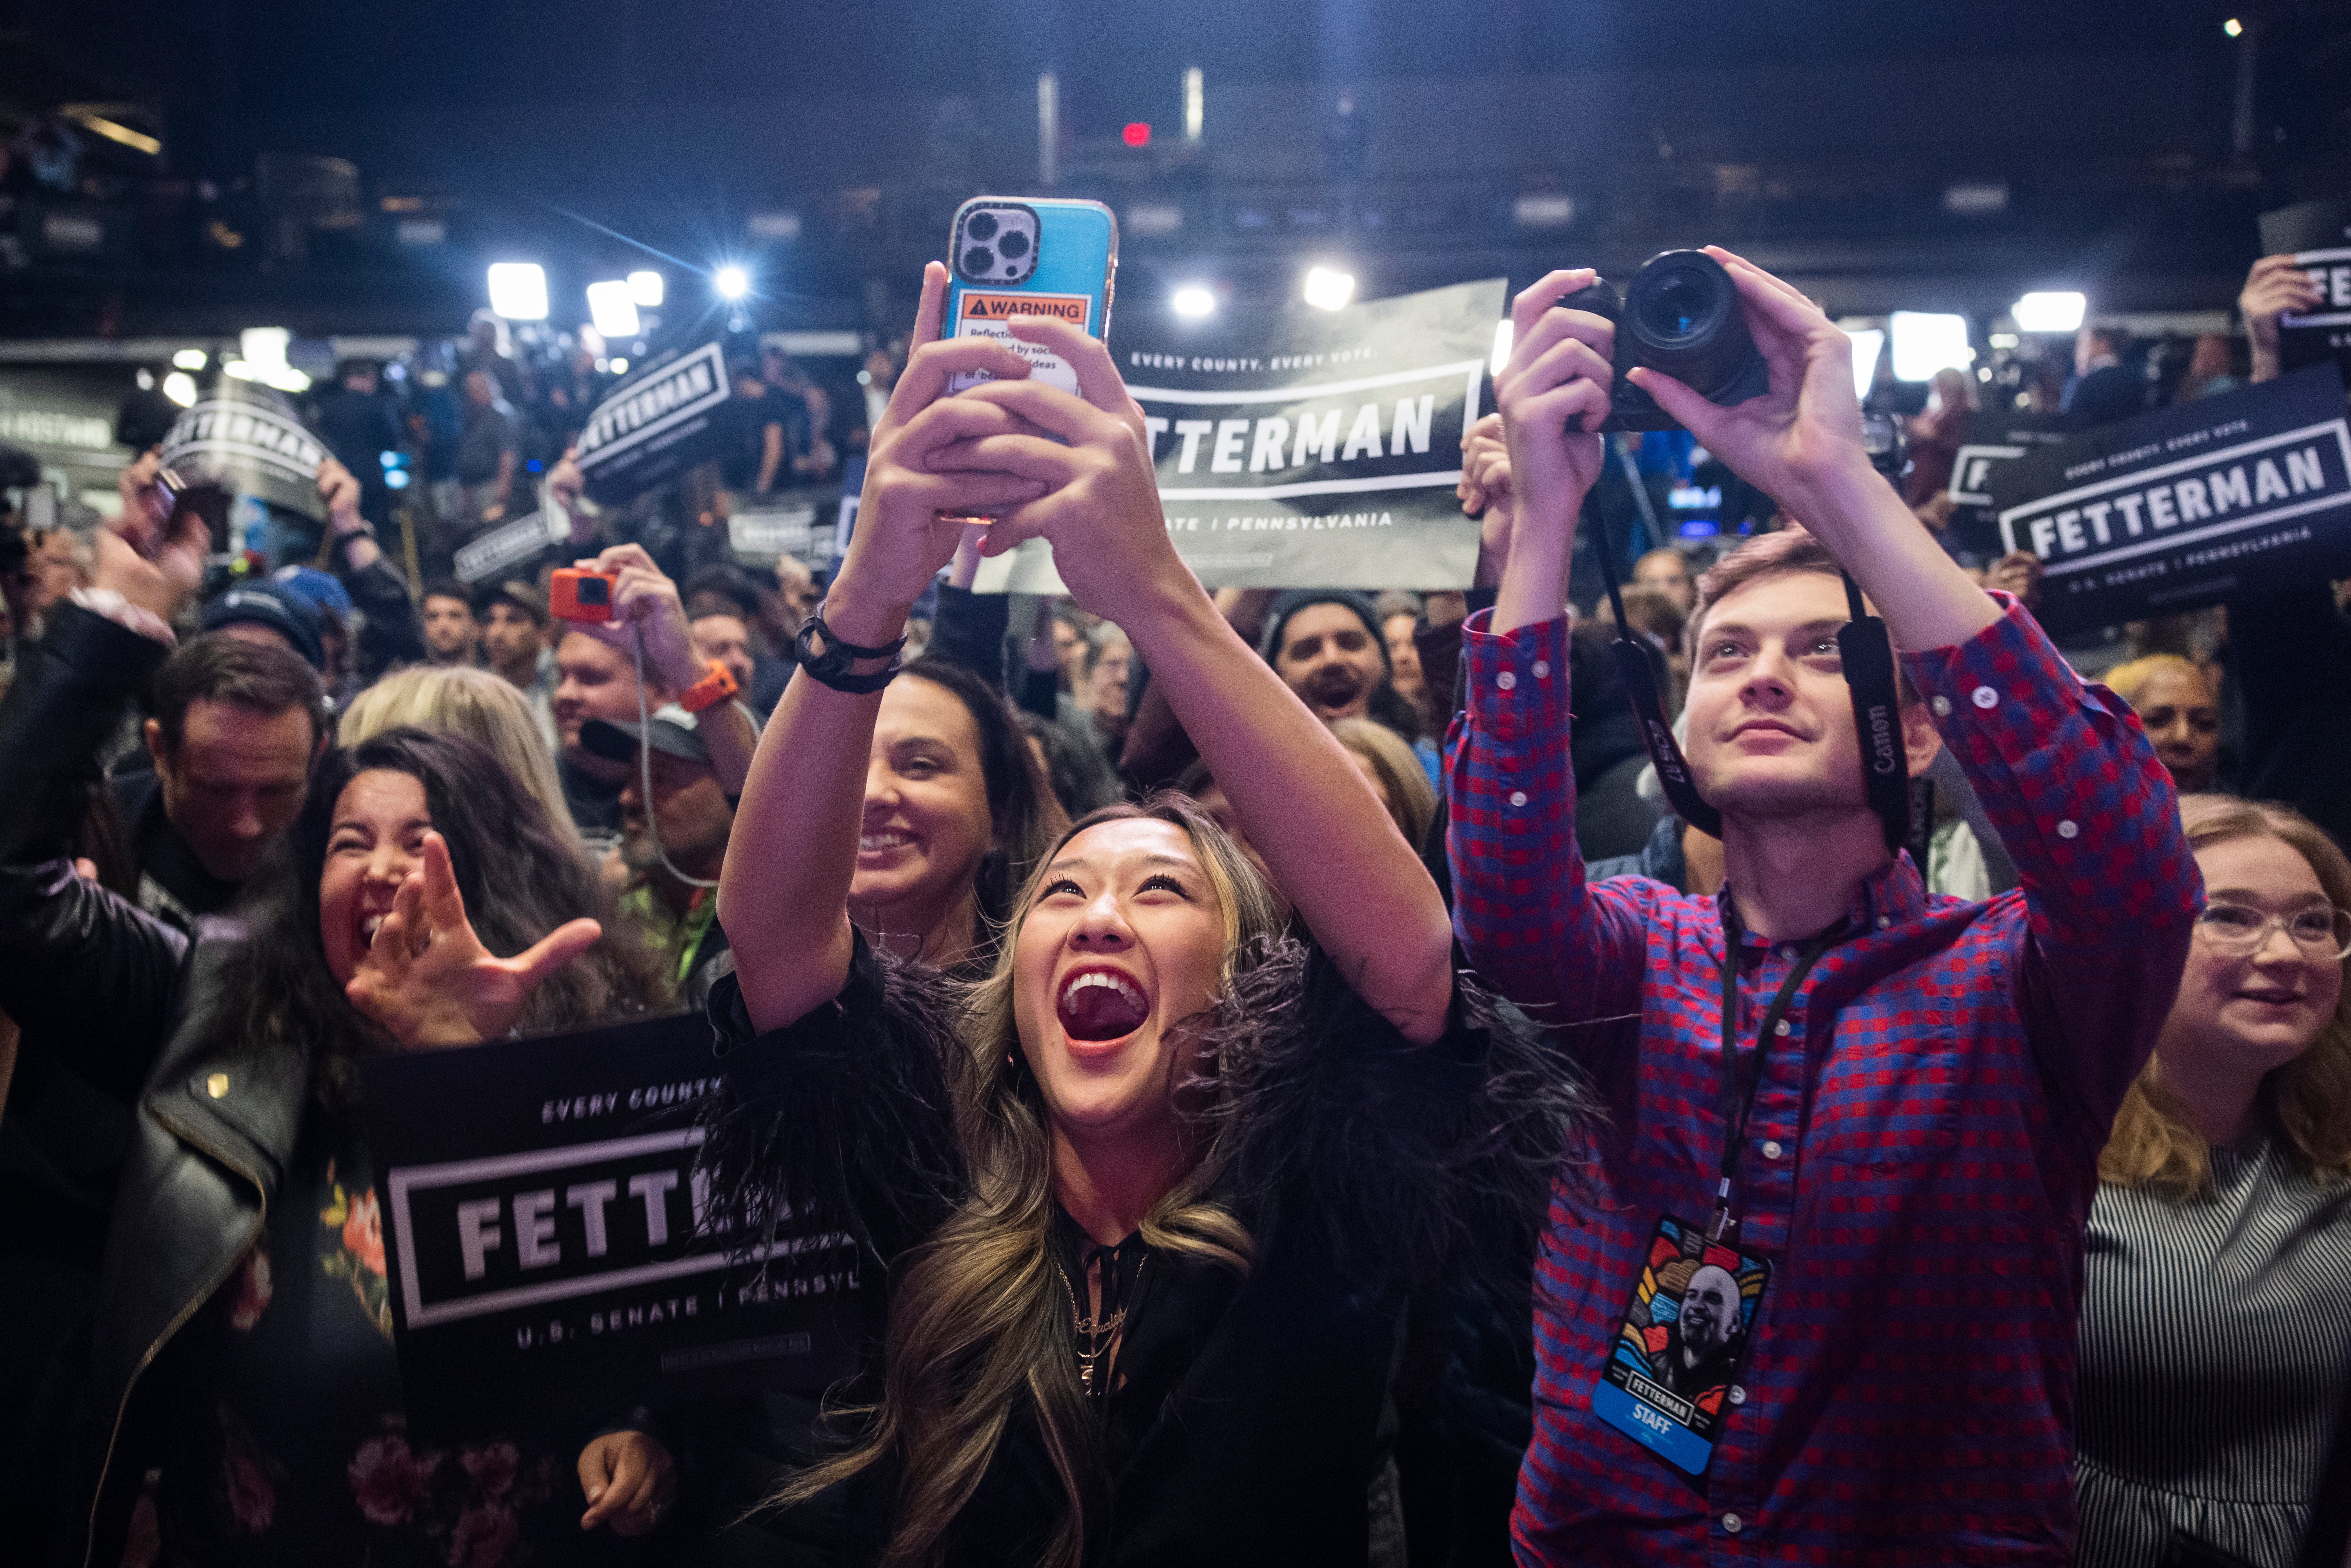 Supporters of John Fetterman cheer after he defeated Republican candidate Mehmet Oz in Pittsburgh